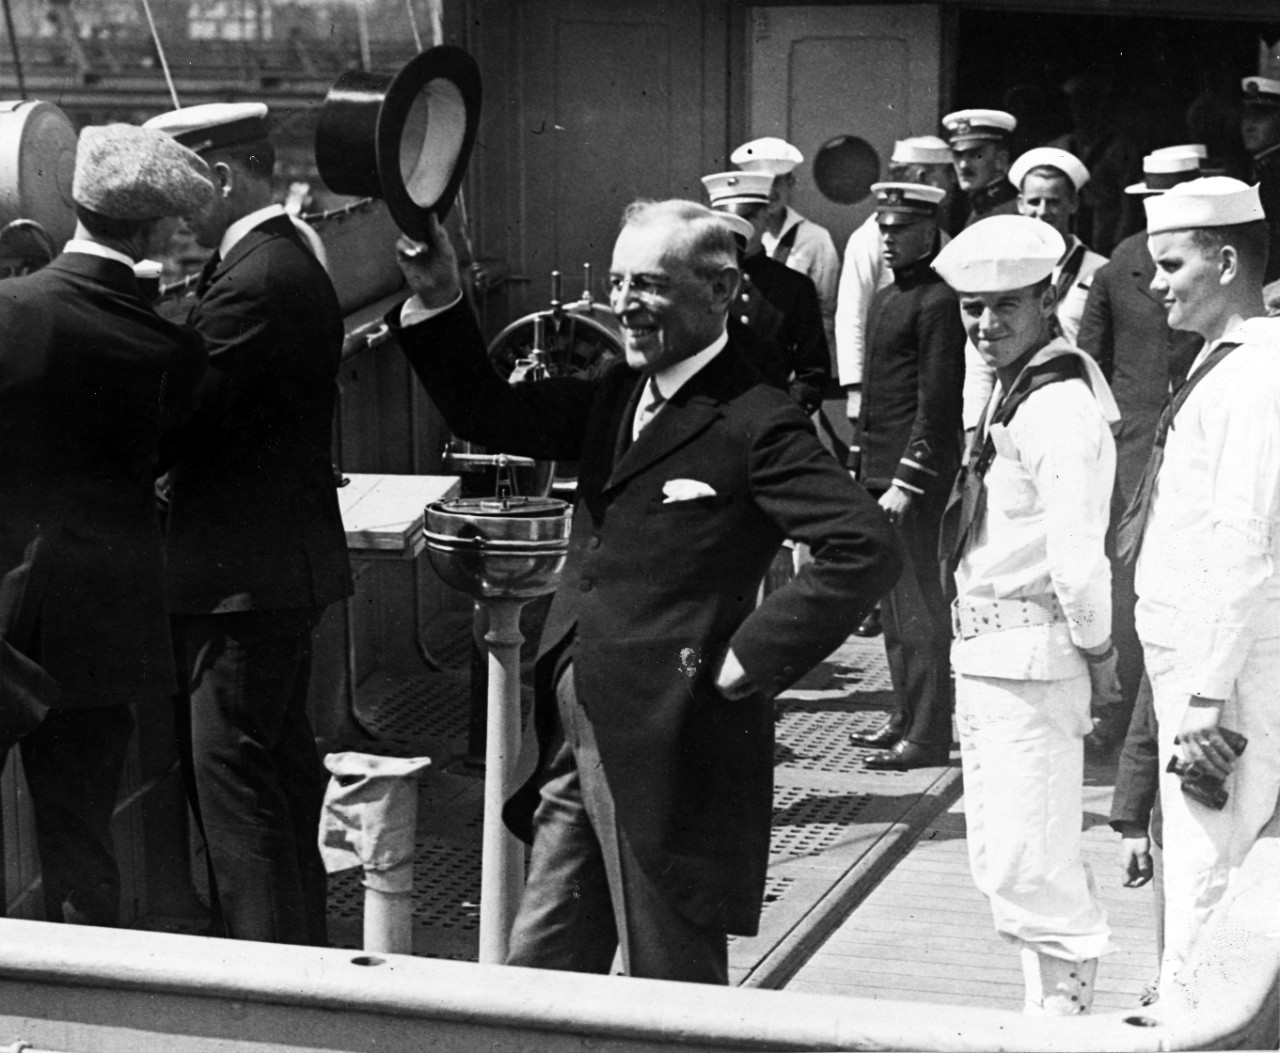 Photograph of Wilson raising his hat as he exits the ship. A row of sailors stands behind.